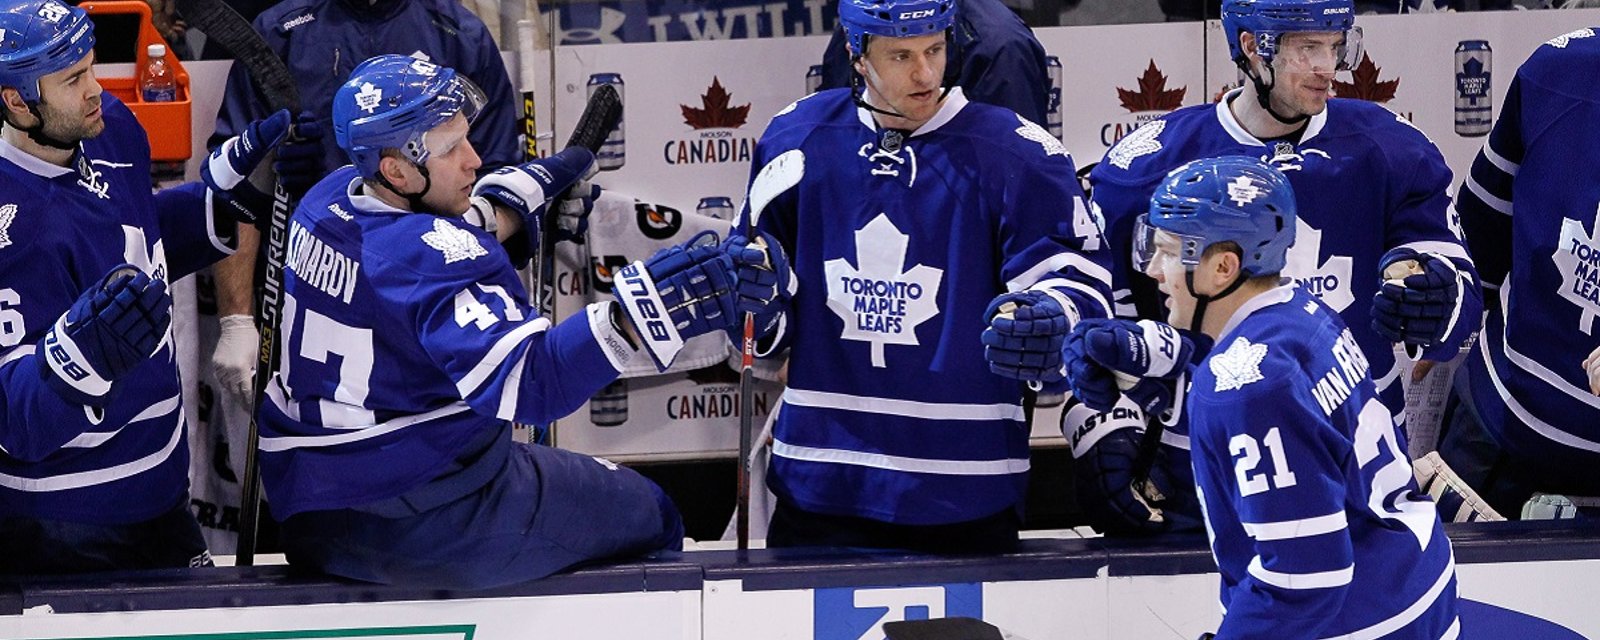 Breaking: Leafs forward absence from practice sparks injury/trade rumors.